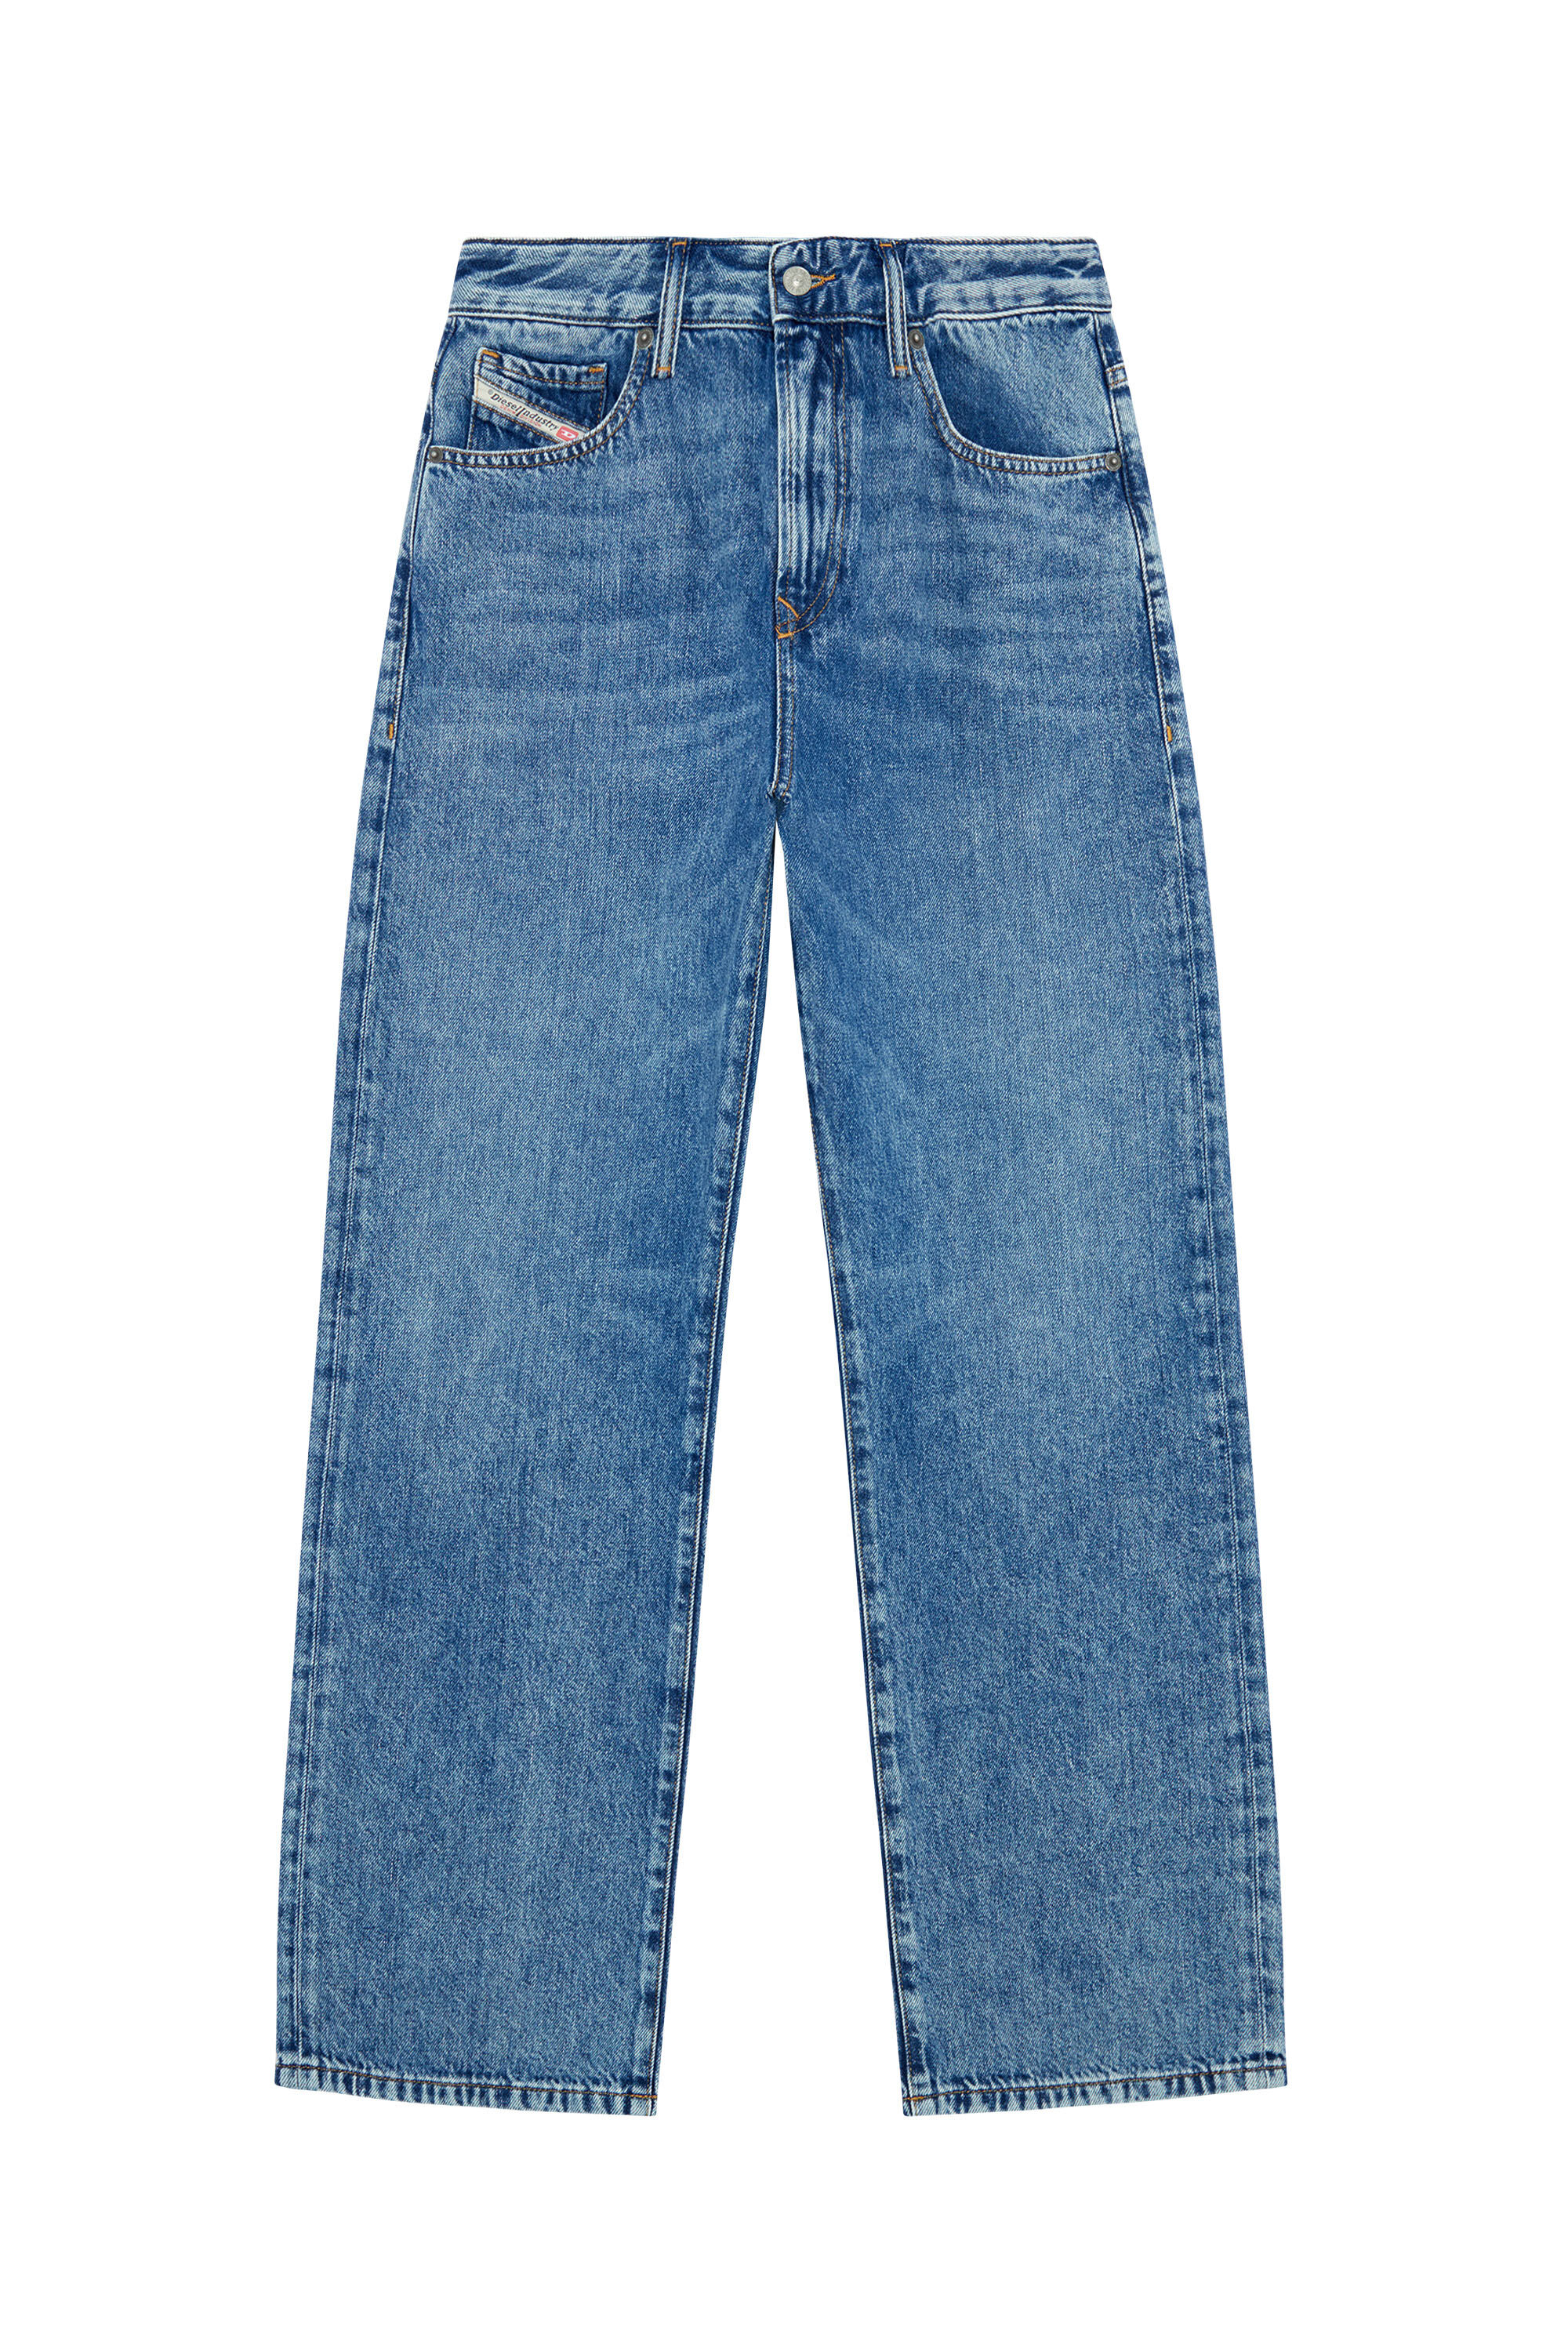 Diesel - Straight Jeans 1999 D-Reggy 09H96, Mujer Straight Jeans - 1999 D-Reggy in Azul marino - Image 2